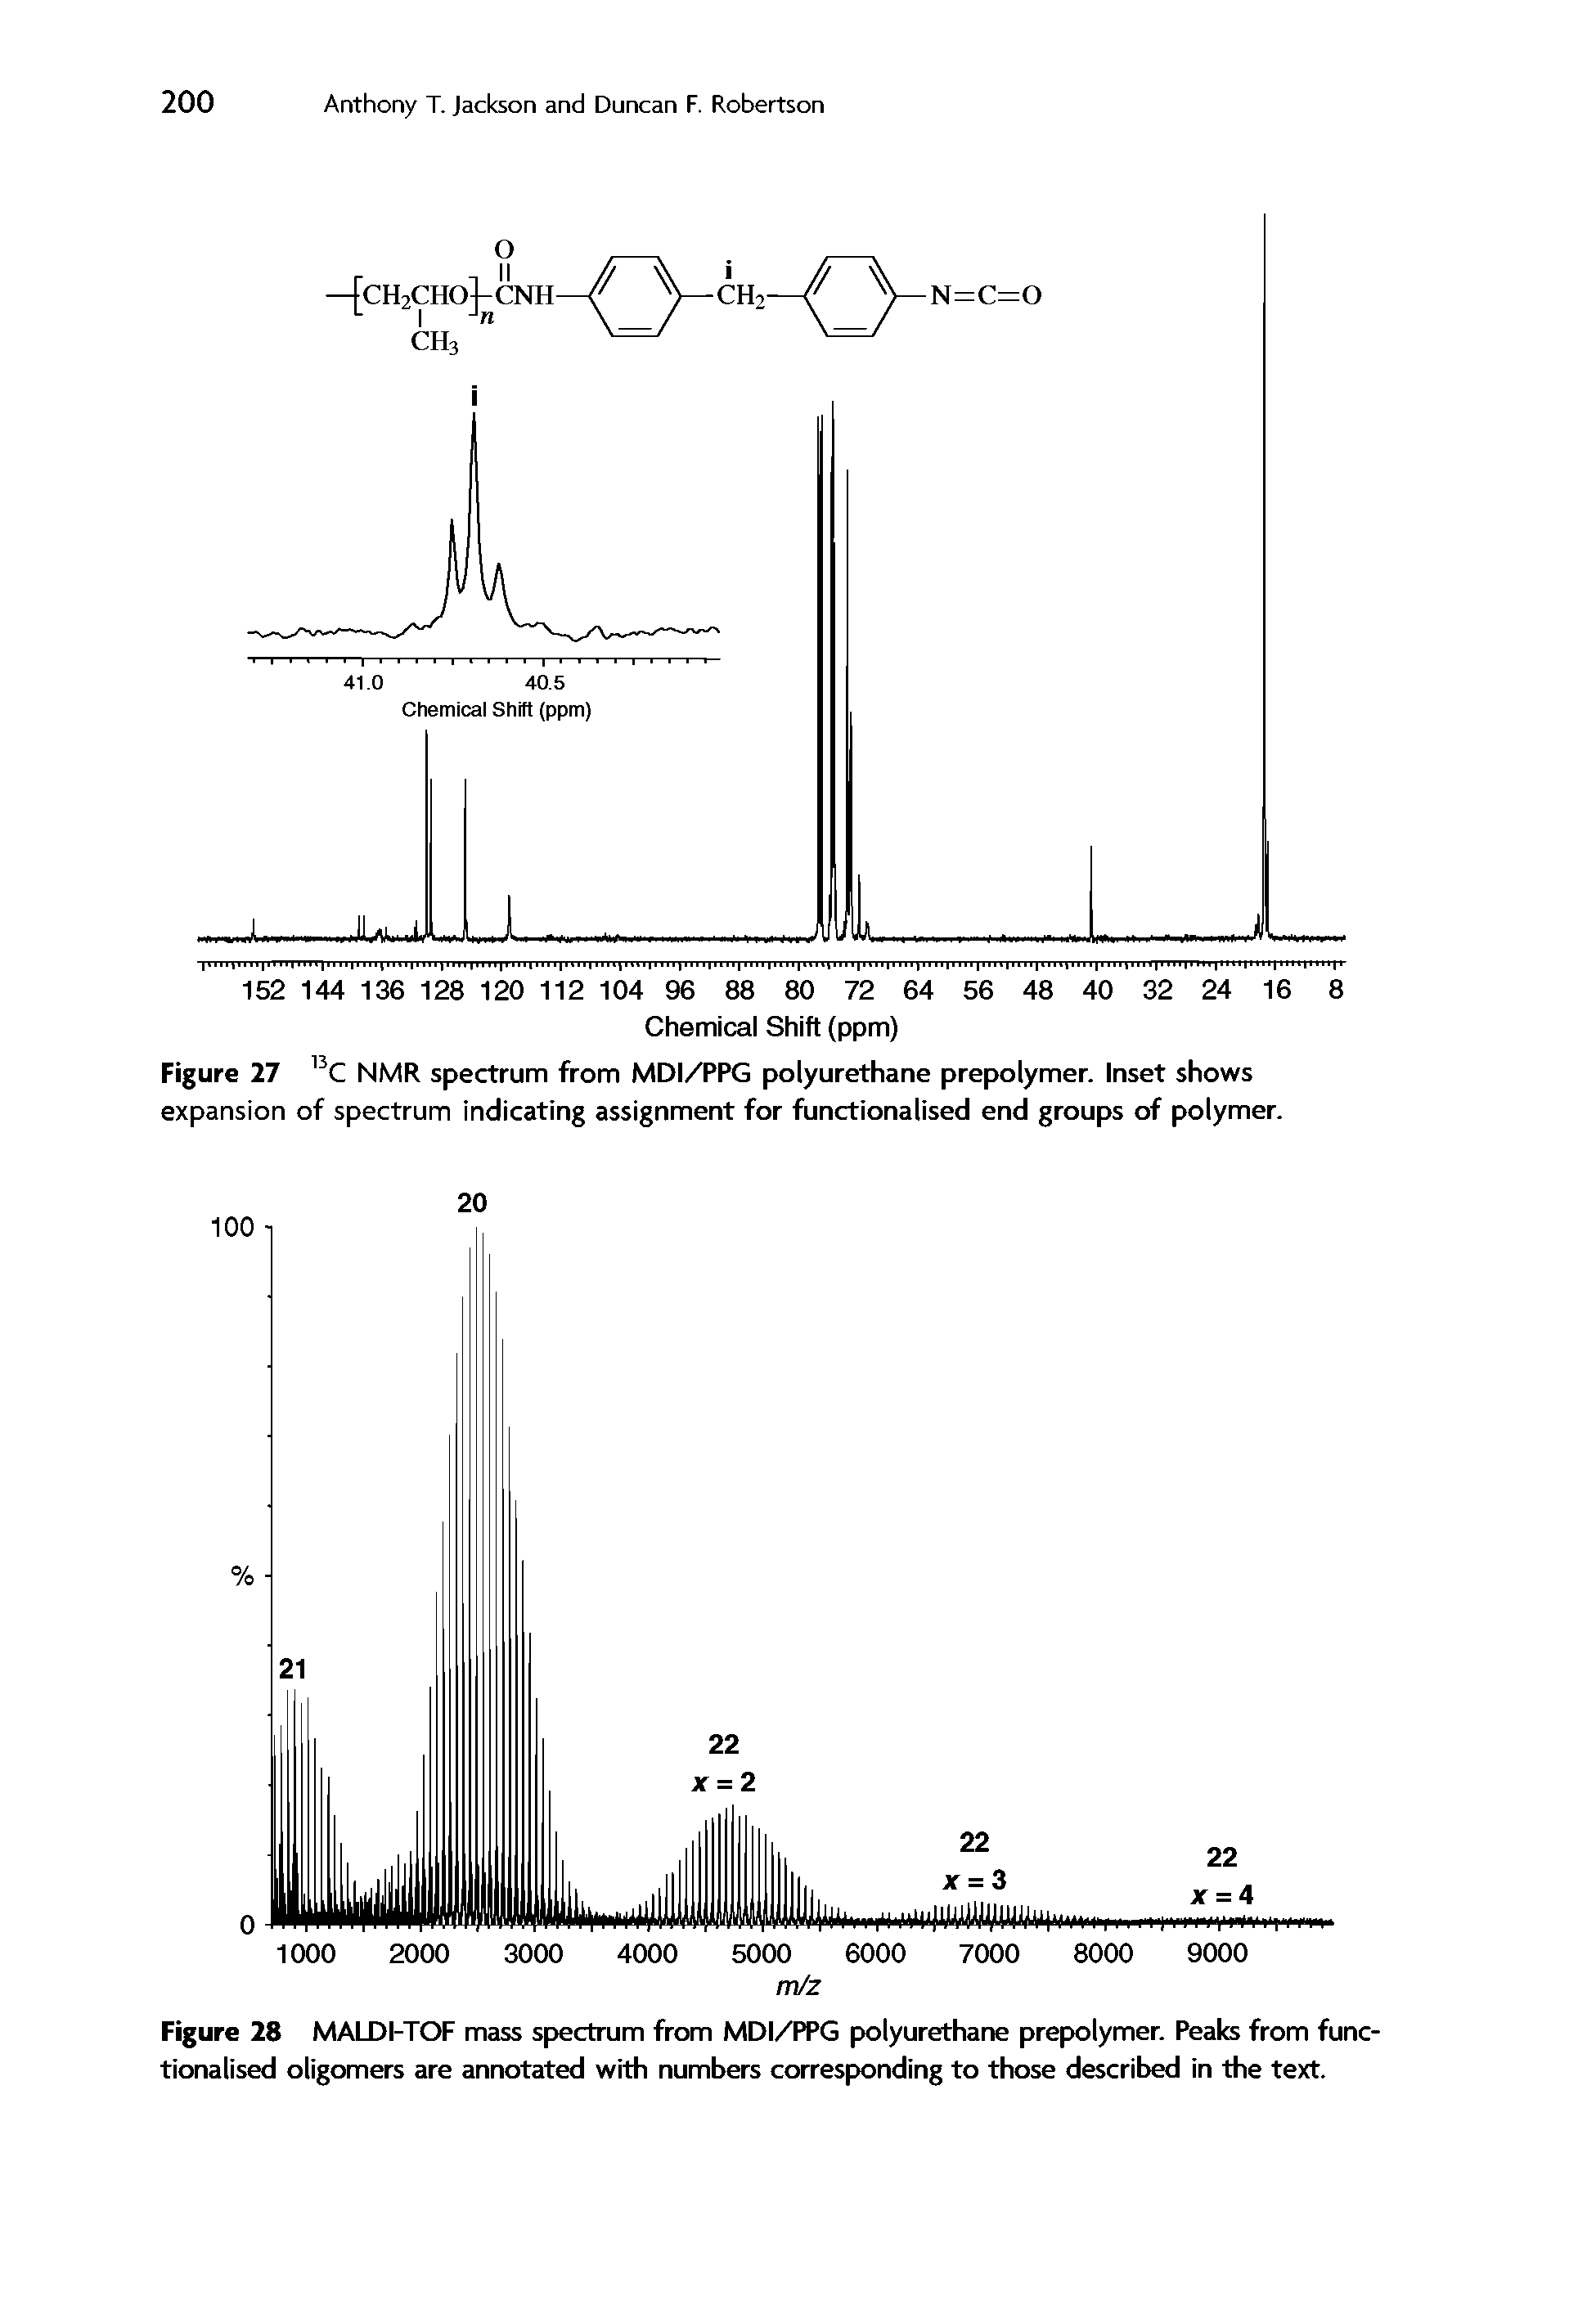 Figure 28 MALDI-TOF mass spectrum from MDI/PPG polyurethane prepolymer. Peaks from functionalised oligomers are annotated with numbers corresponding to those described in the text.